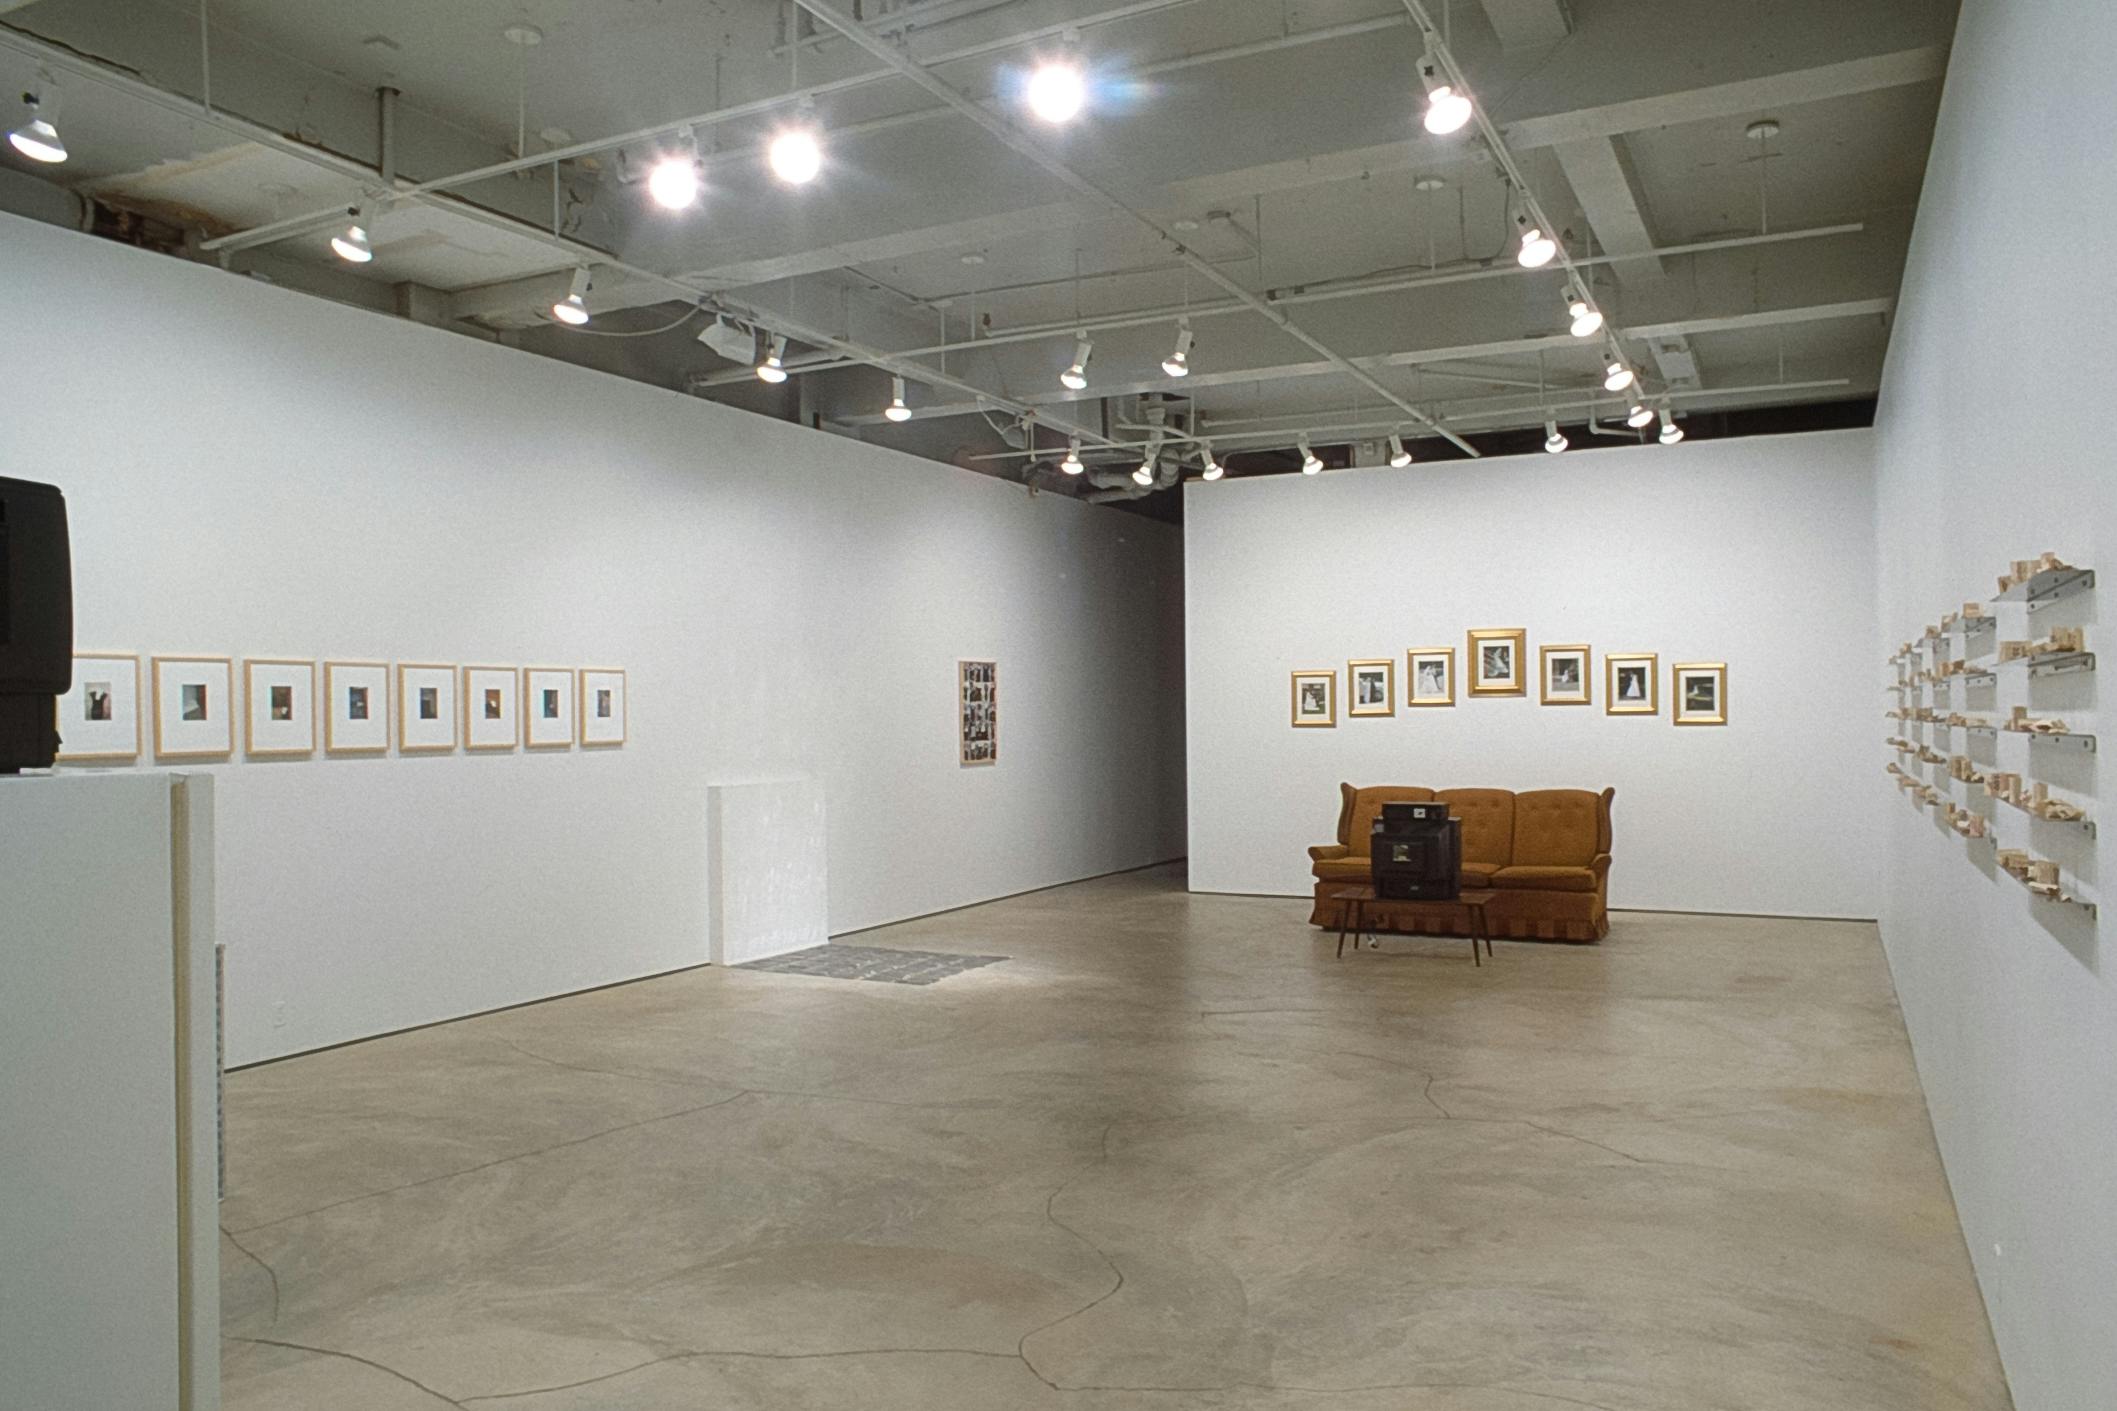 Multiple artworks are installed in the gallery. A mustard-coloured couch is placed with a CRT TV at the end of the gallery. Small-sized sculptures and pictures are mounted on the white walls.